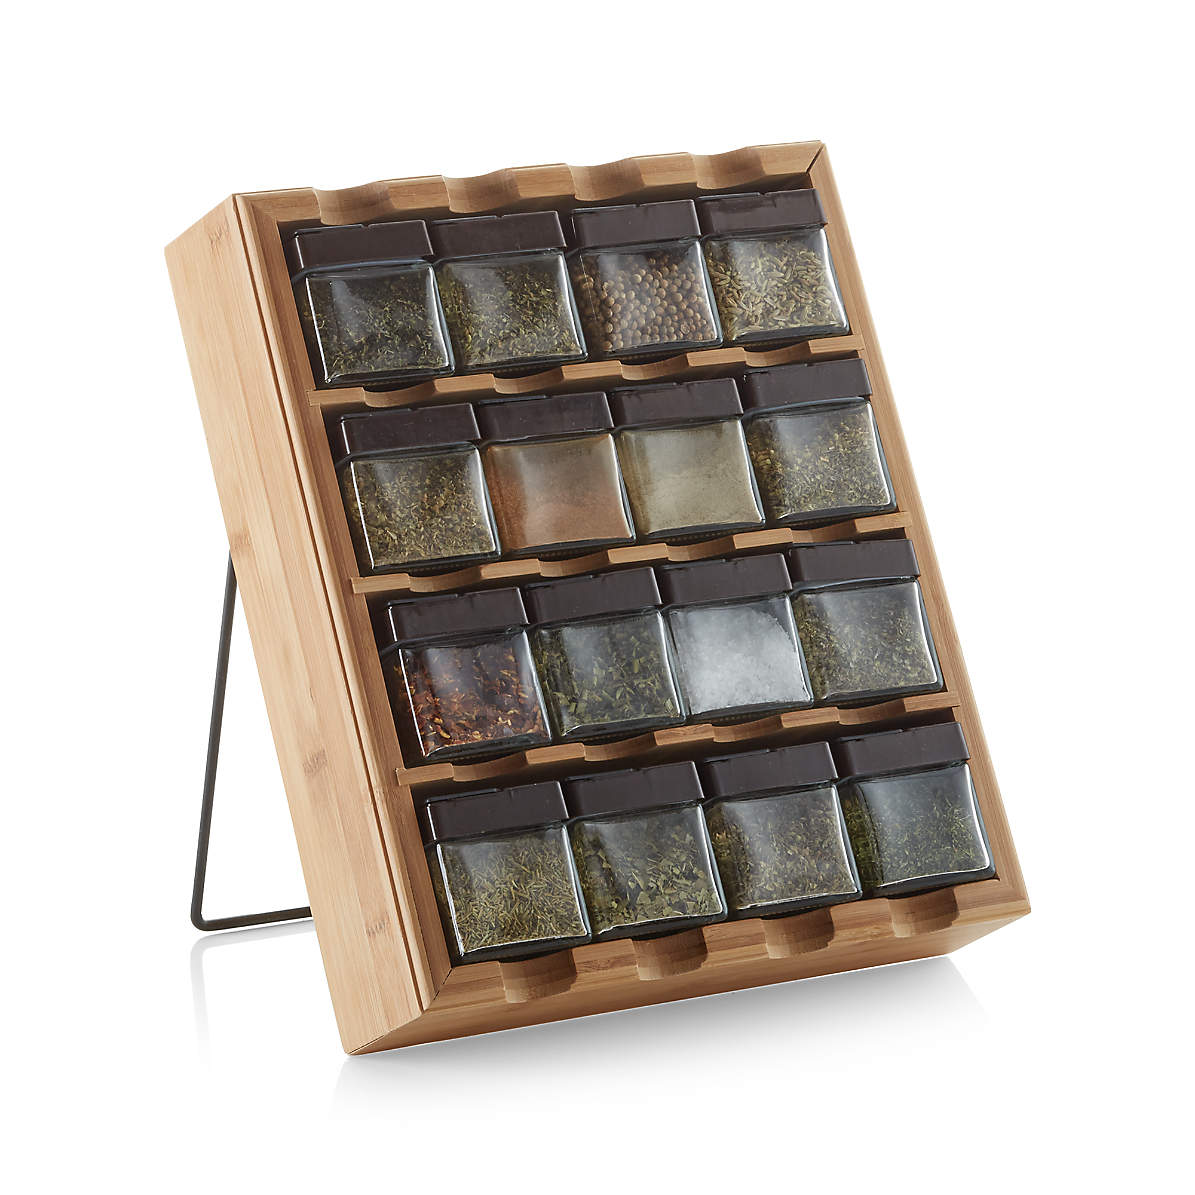 Tabletop Bamboo Spice Rack